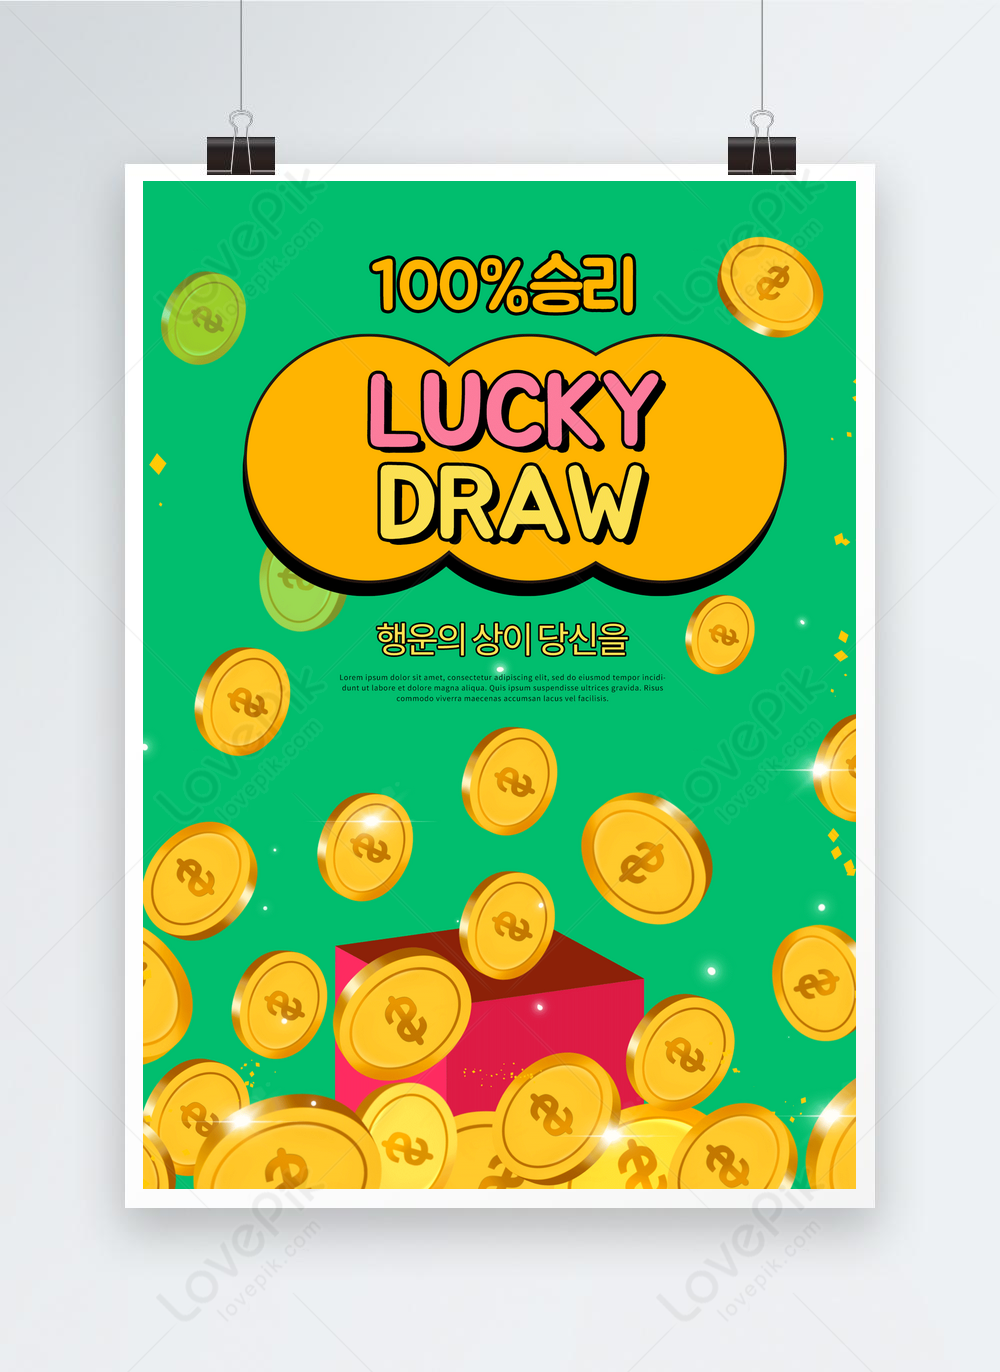 Lucky Draw Blue Poster Template | PSD Free Download - Pikbest